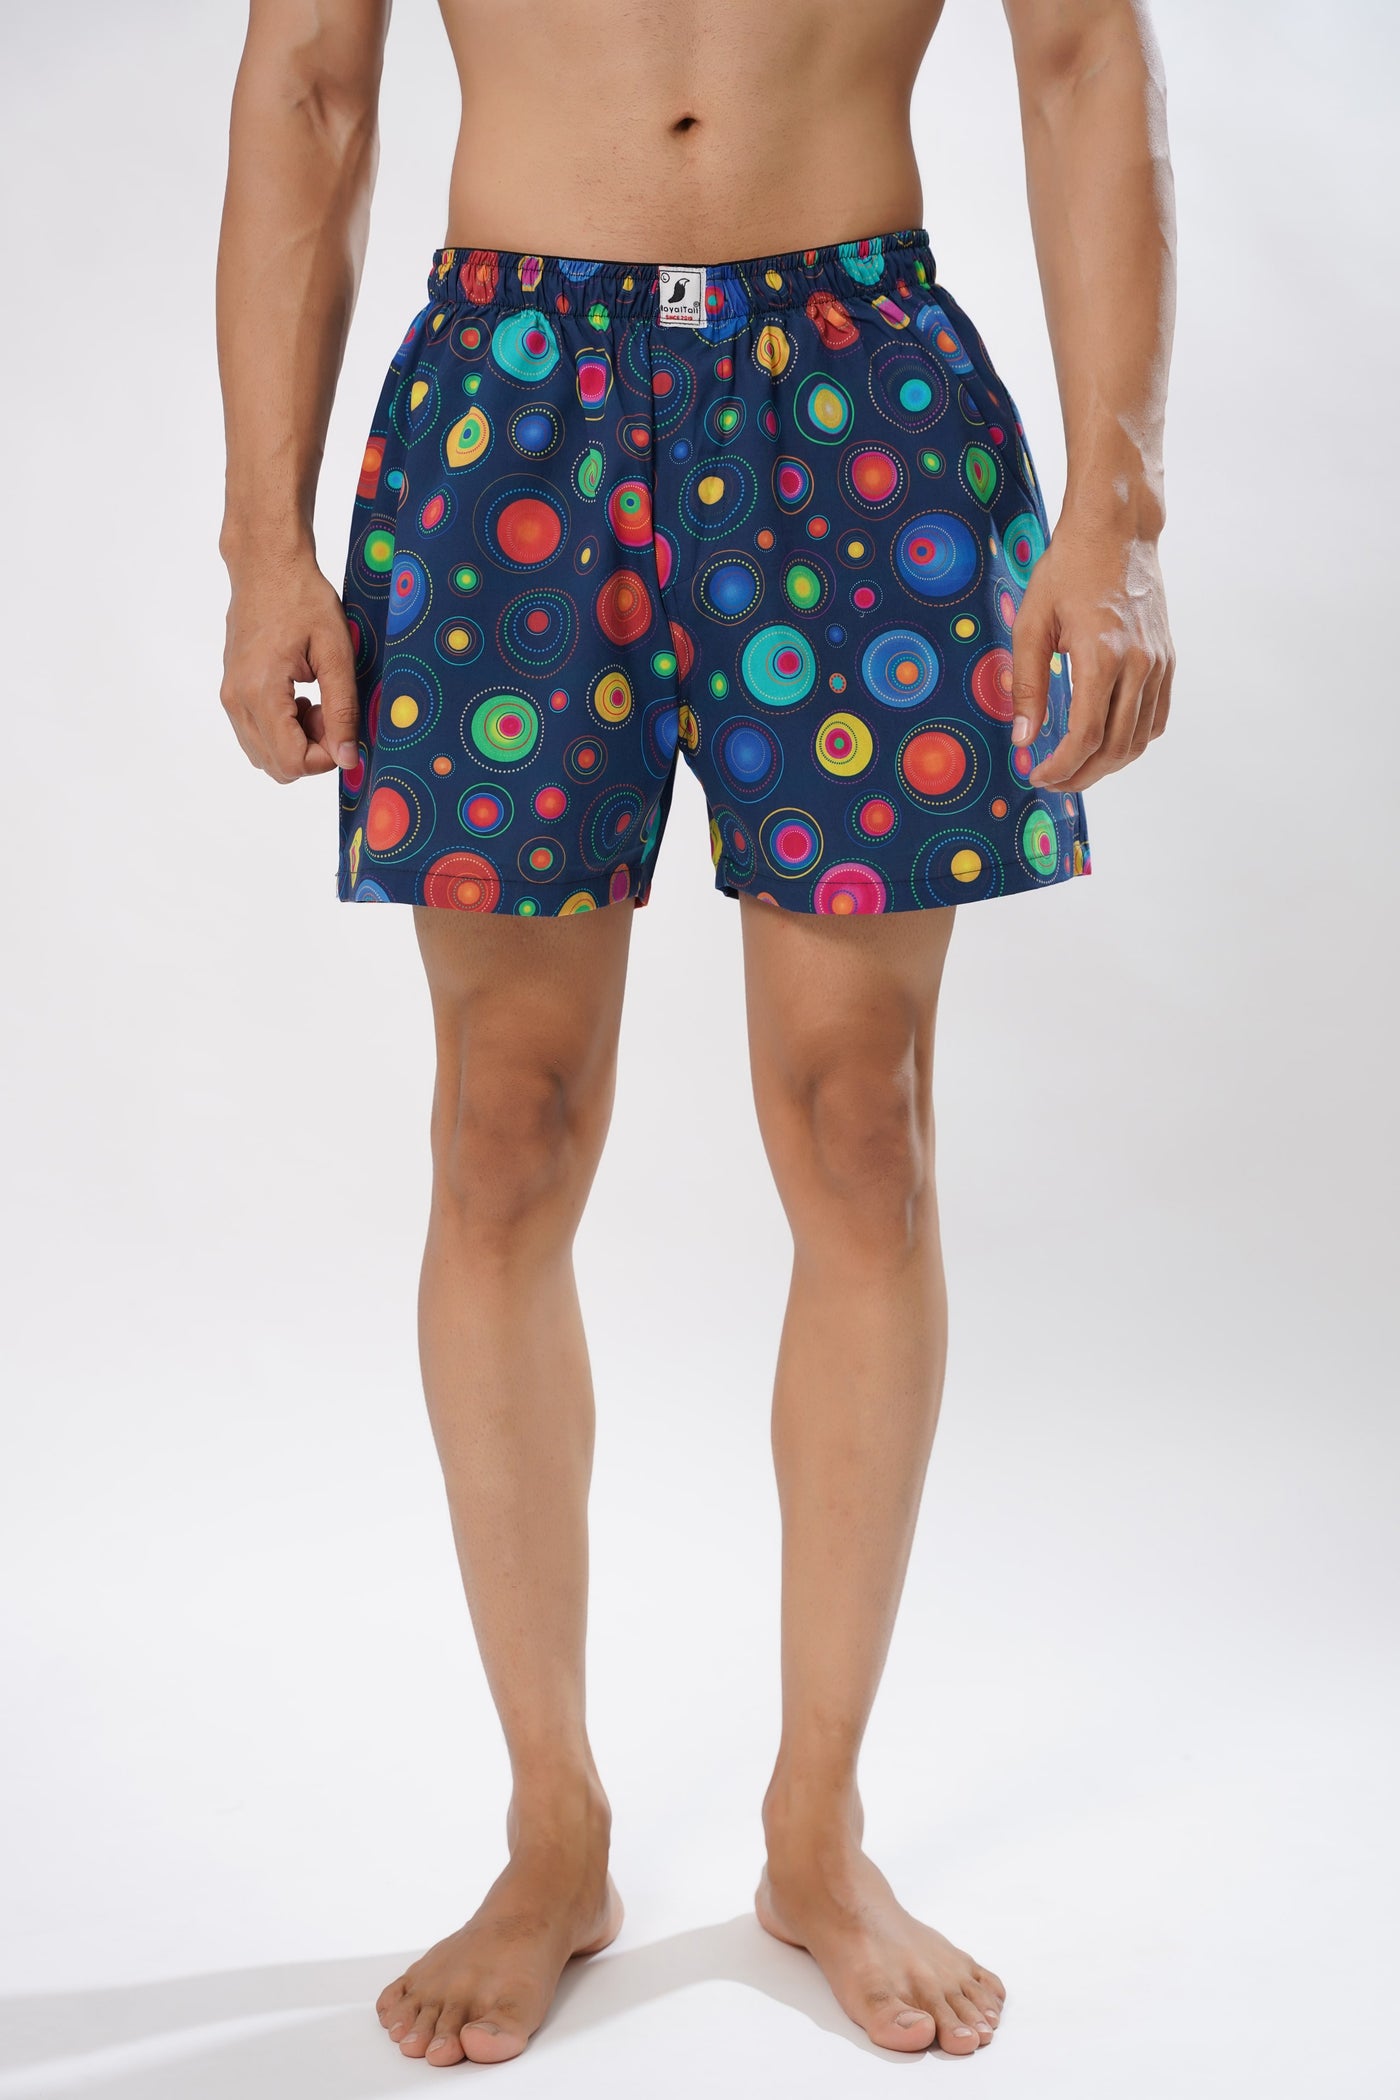 NAVY BLUE ALL OVER PRINTED MENS BOXERS